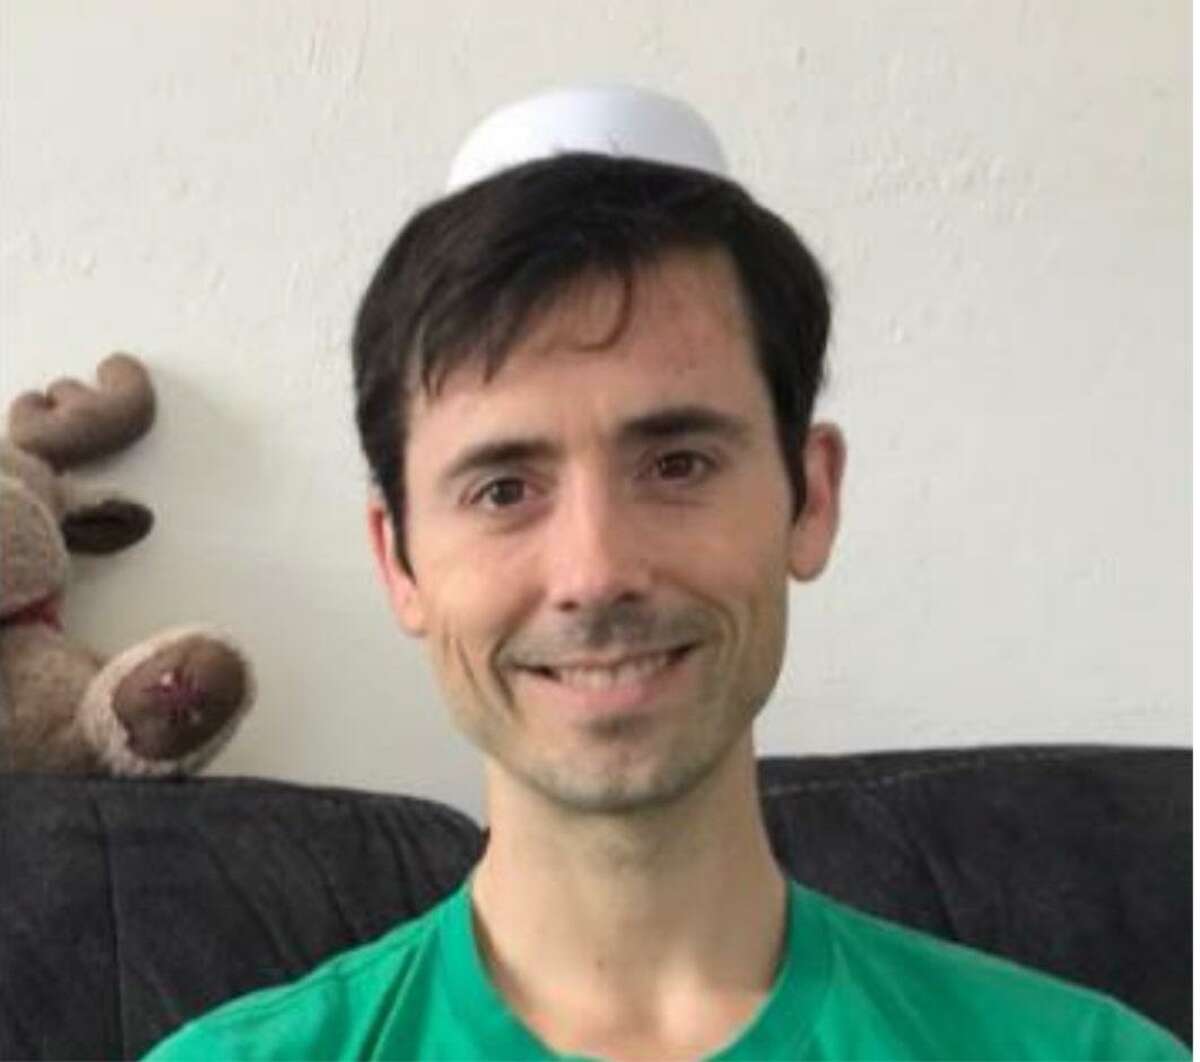 A photo of Philip Kreycik, 37, of Berkeley, who was reported missing by his wife after he went for a mid-morning run in the East Bay and never returned.